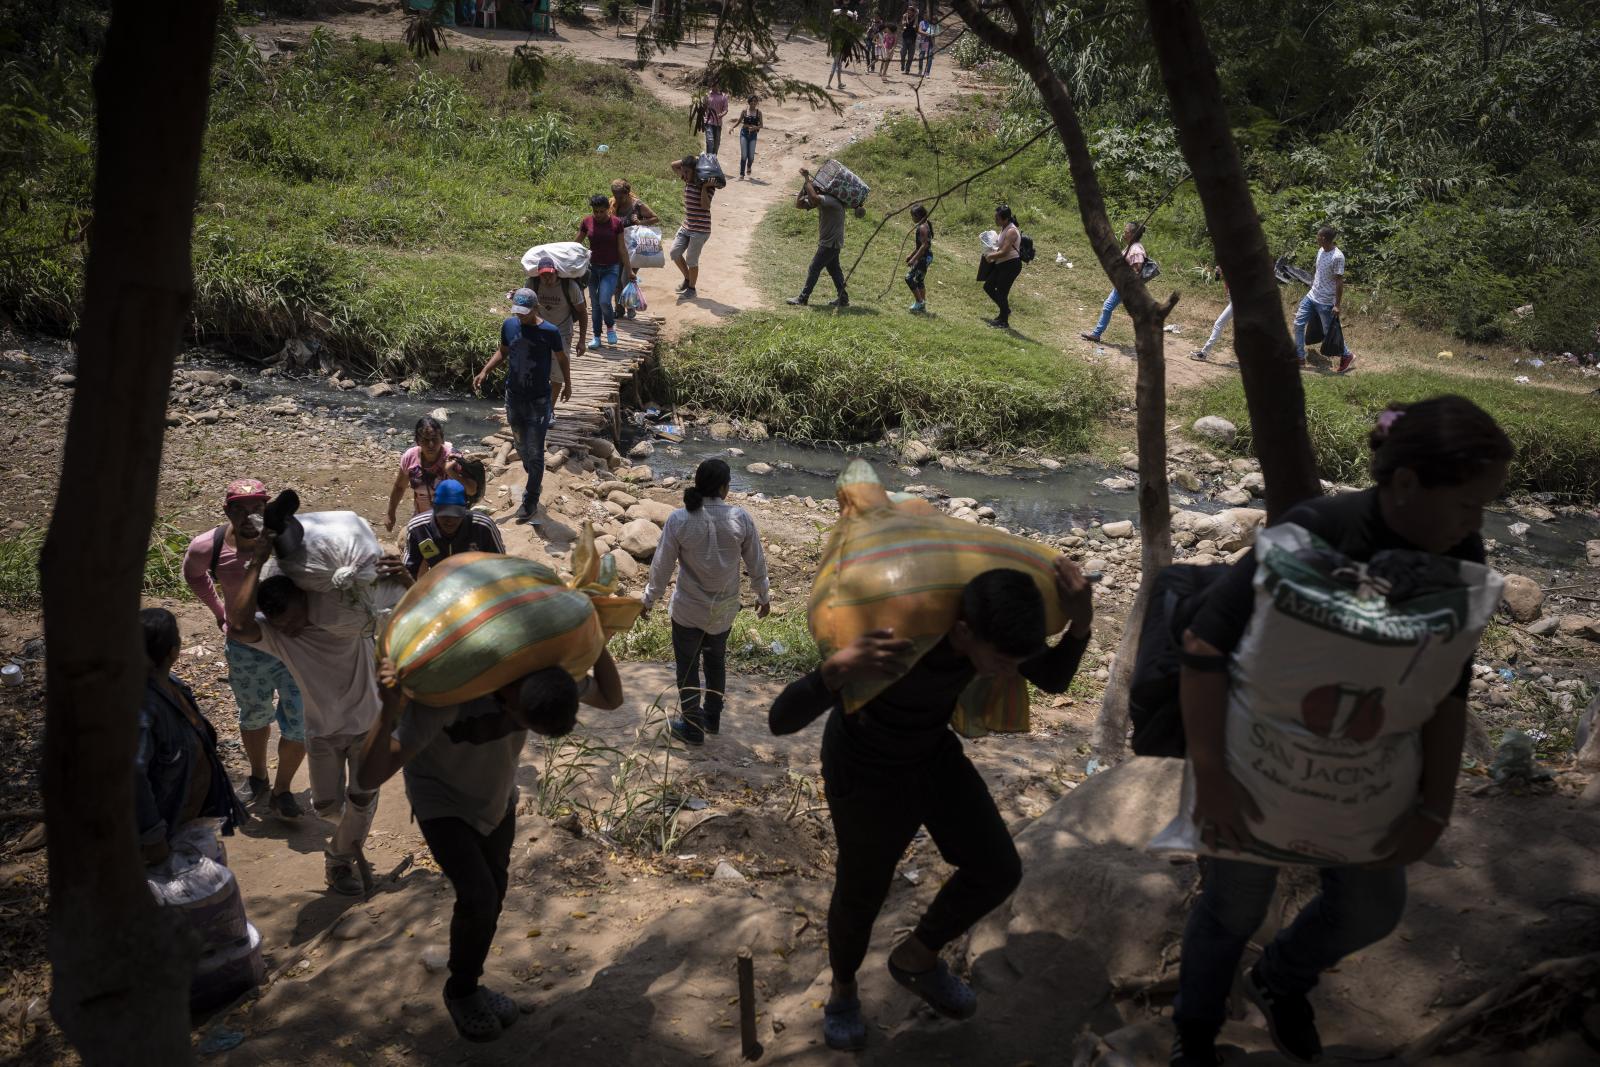 Between violence and justice - A group of Venezuelans cross the border through an...